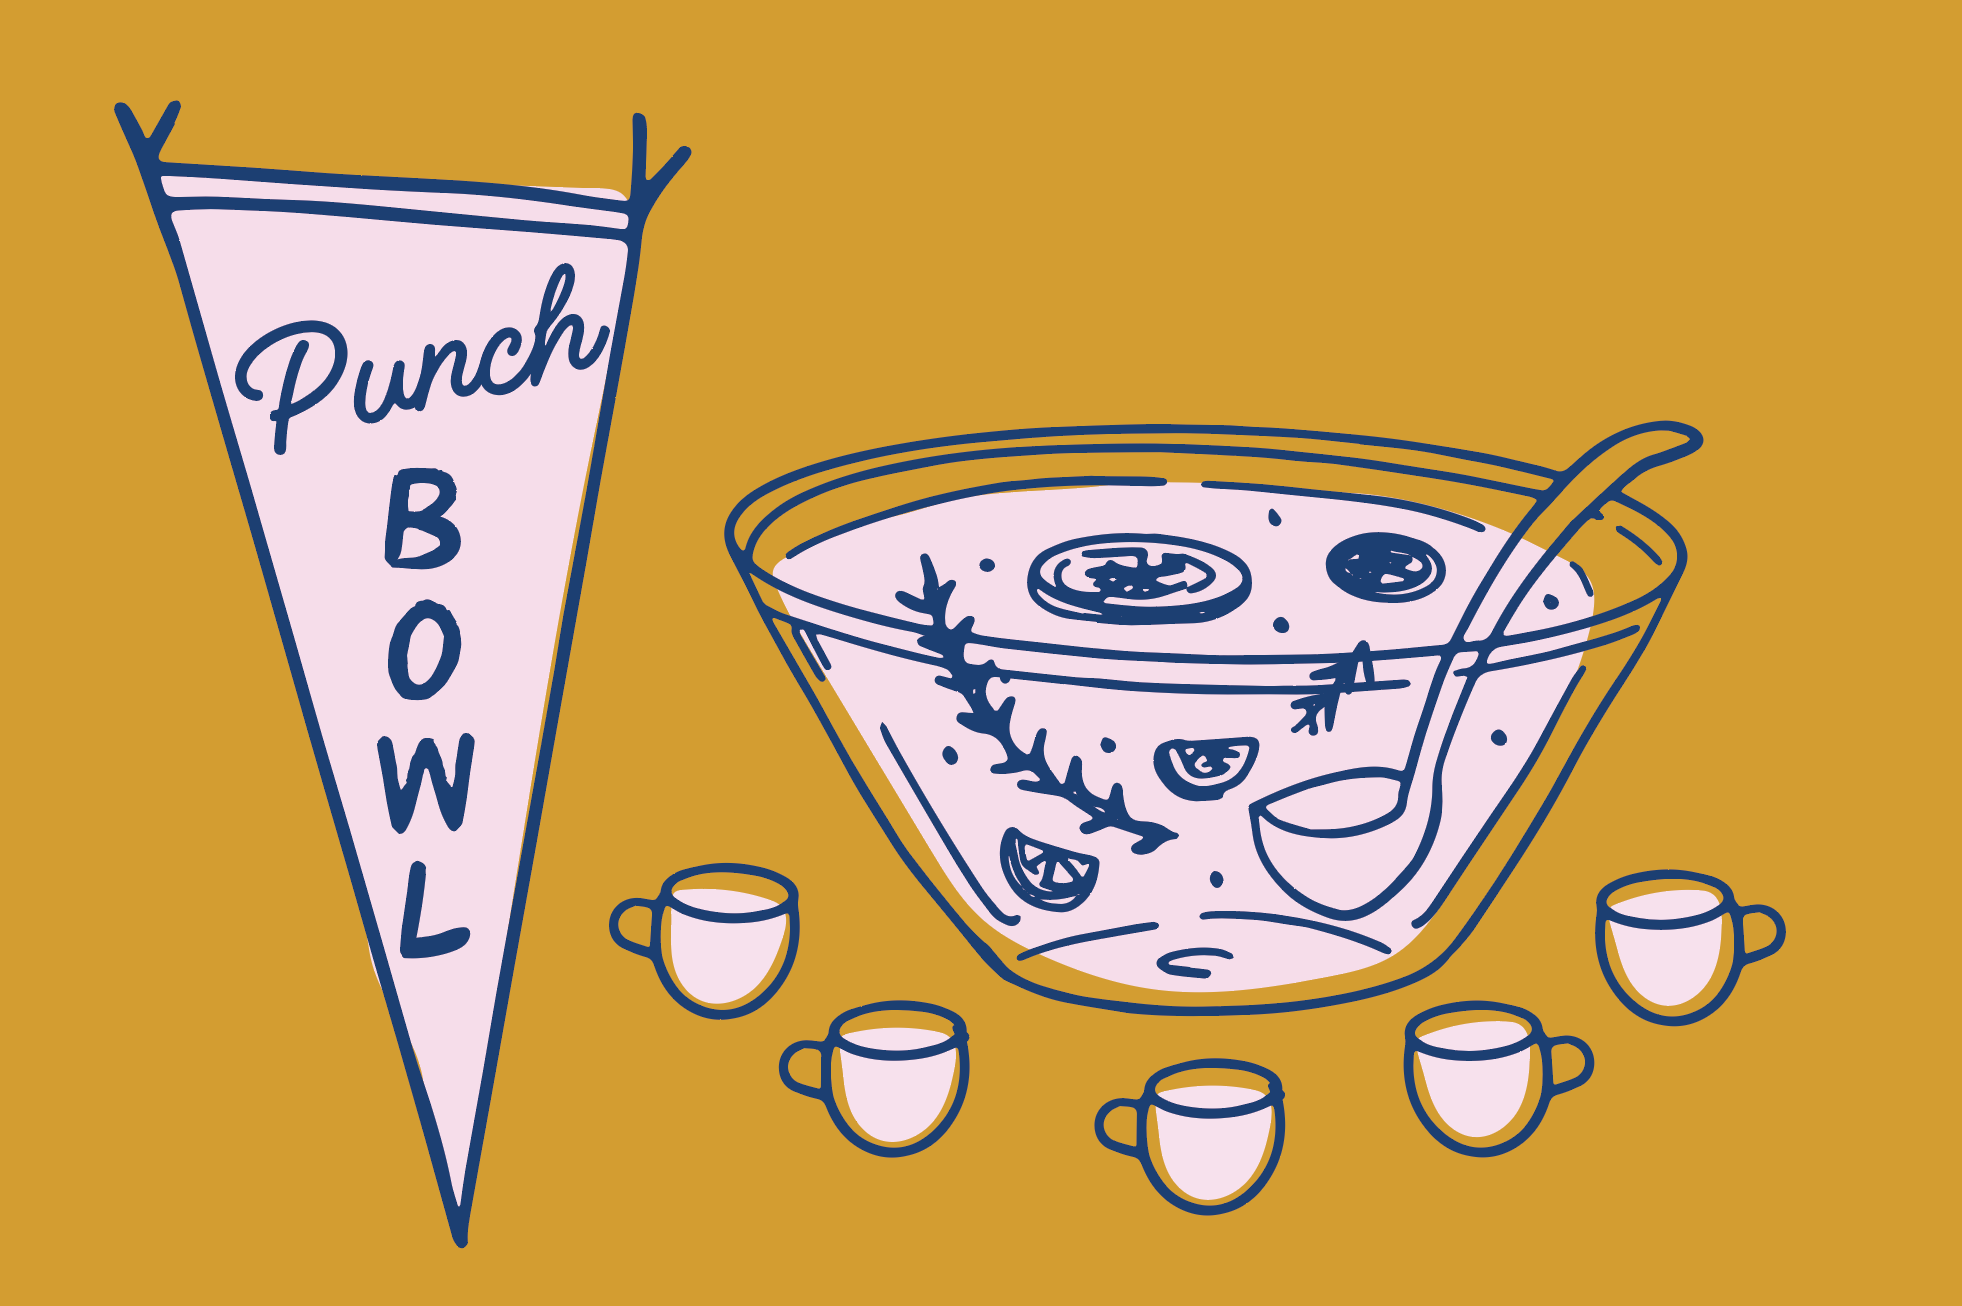 Party Punchbowl